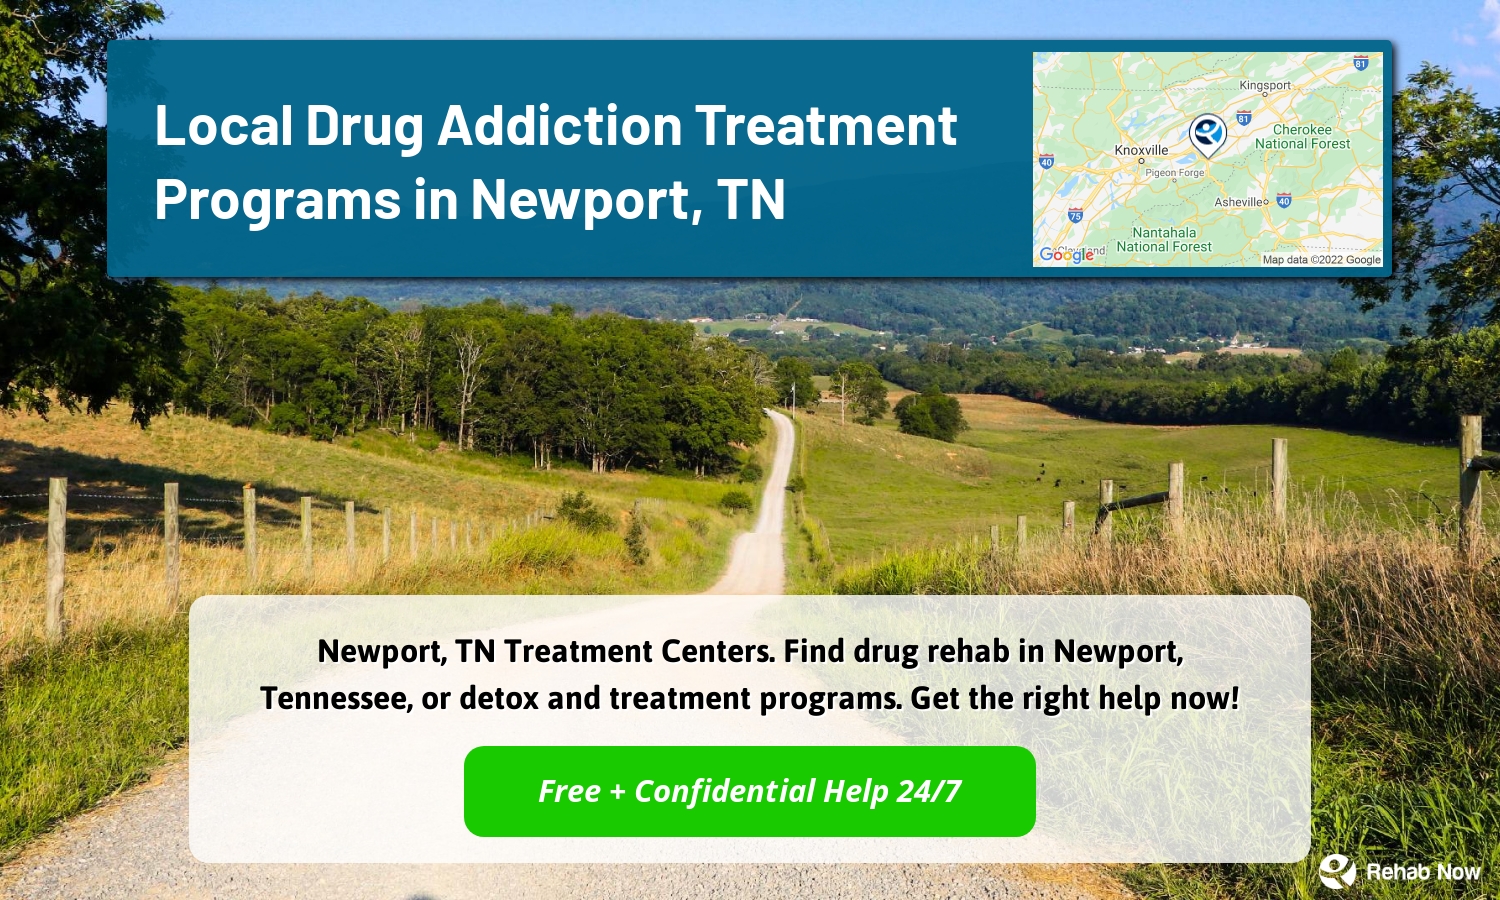 Newport, TN Treatment Centers. Find drug rehab in Newport, Tennessee, or detox and treatment programs. Get the right help now!